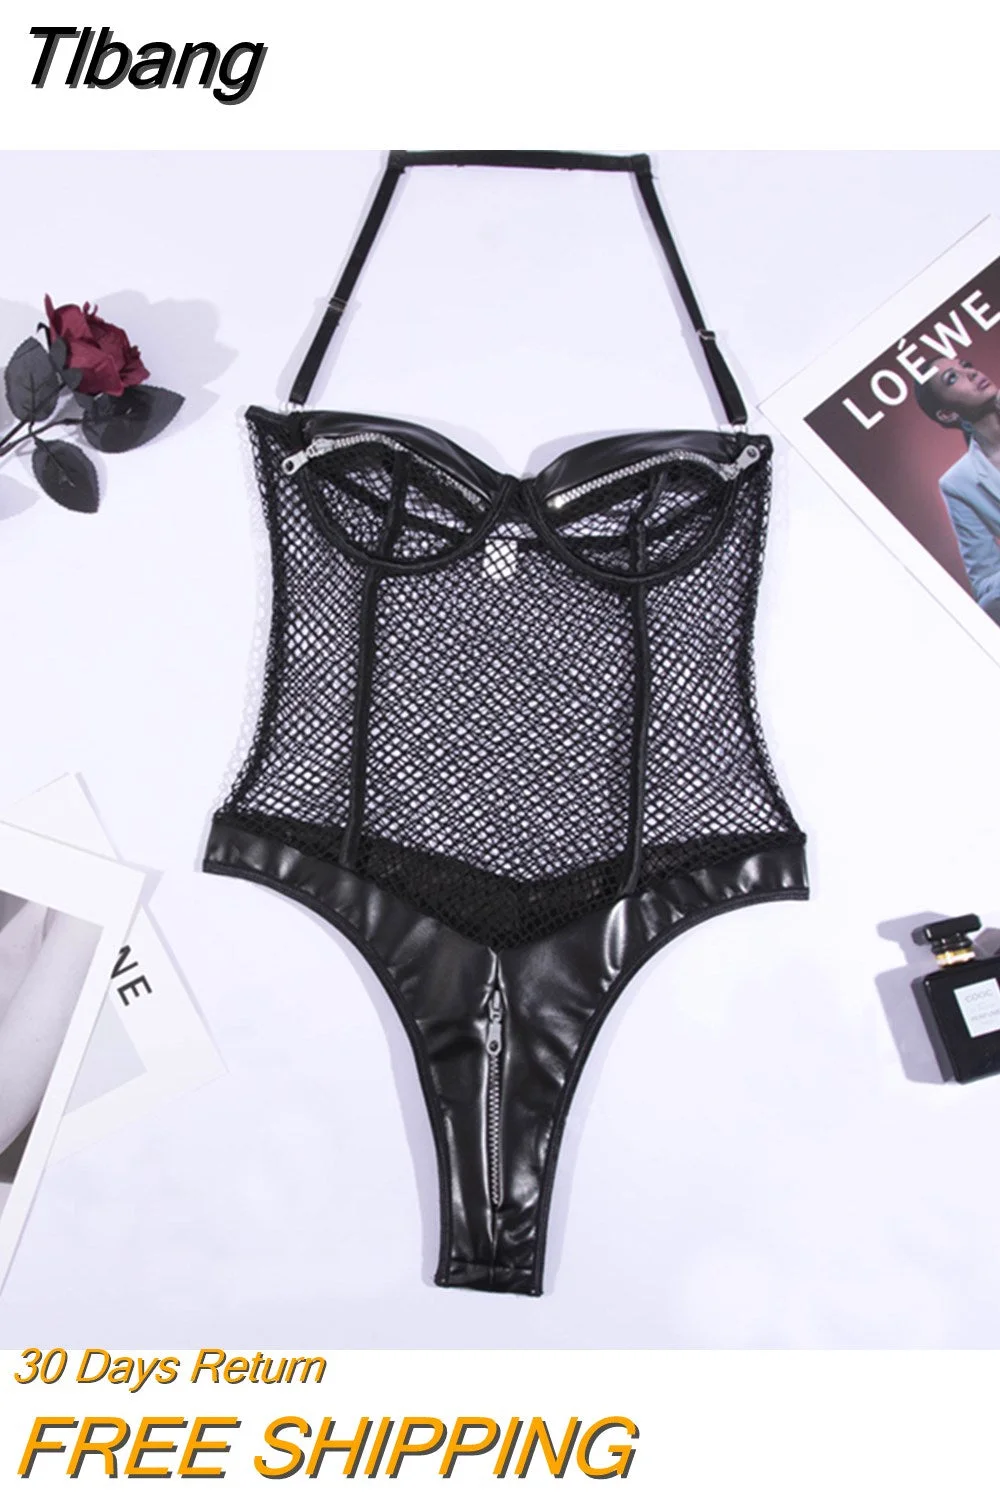 Tlbang Sensual Fishnet Bodysuit Women Lace Exotic Costumes Sexy Hollow Out Halter Bodycon Hot Lingerie Sissy Zipper Body